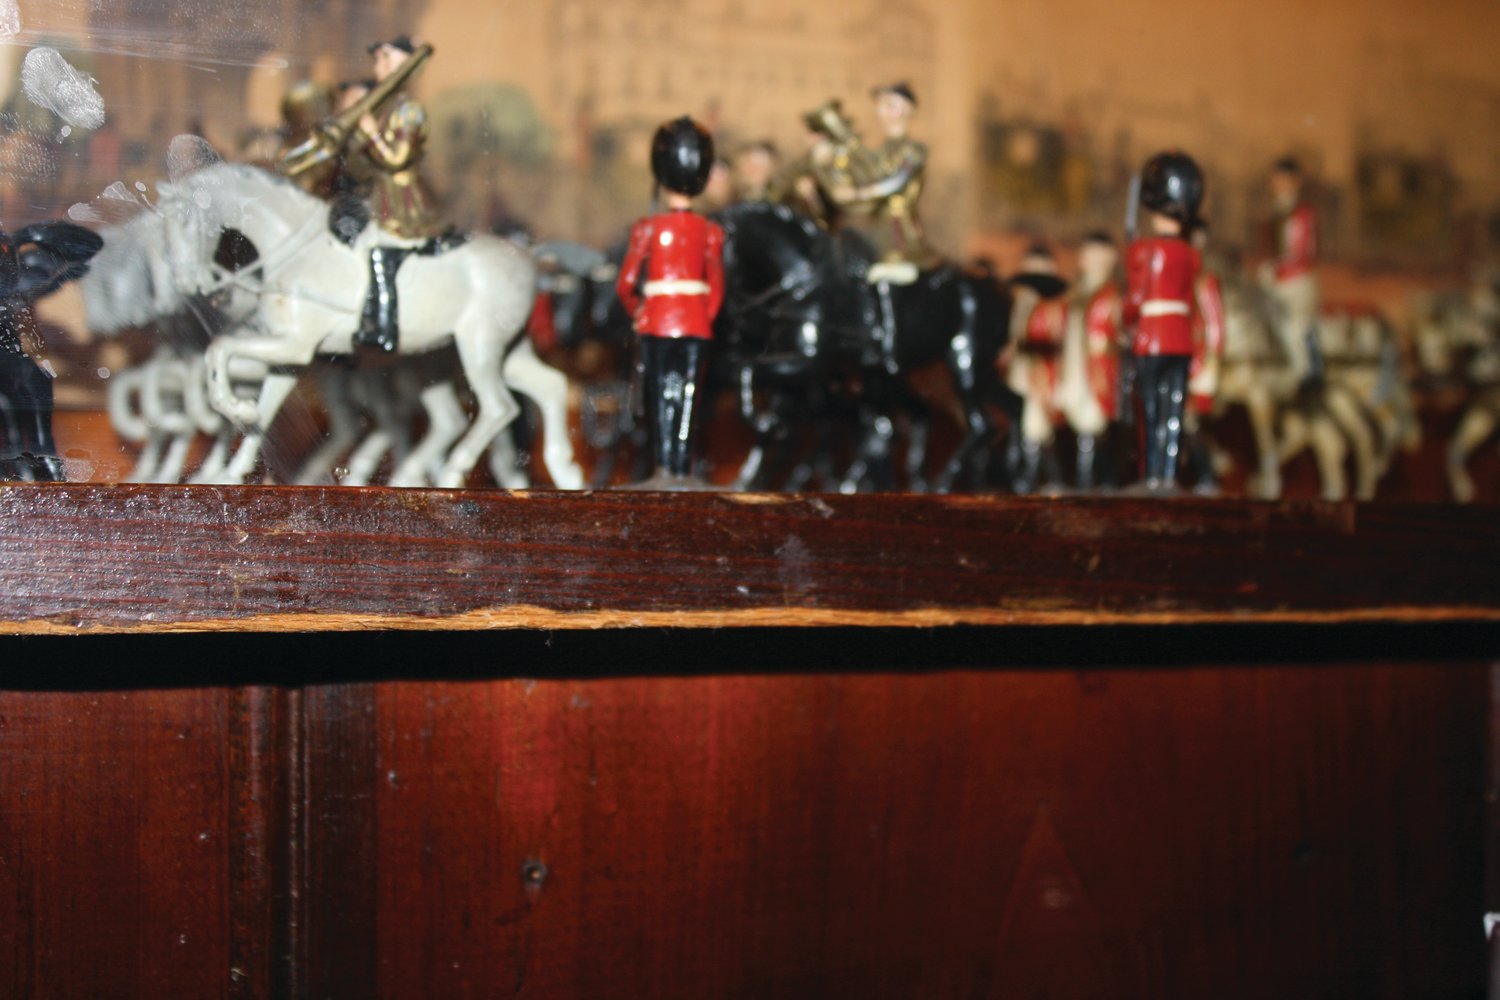 KATHRYN FINEGAN CLARK
A miniature coronation procession circles the bar at the the Lumberville hotel owned by a Tory during the American Revolution.